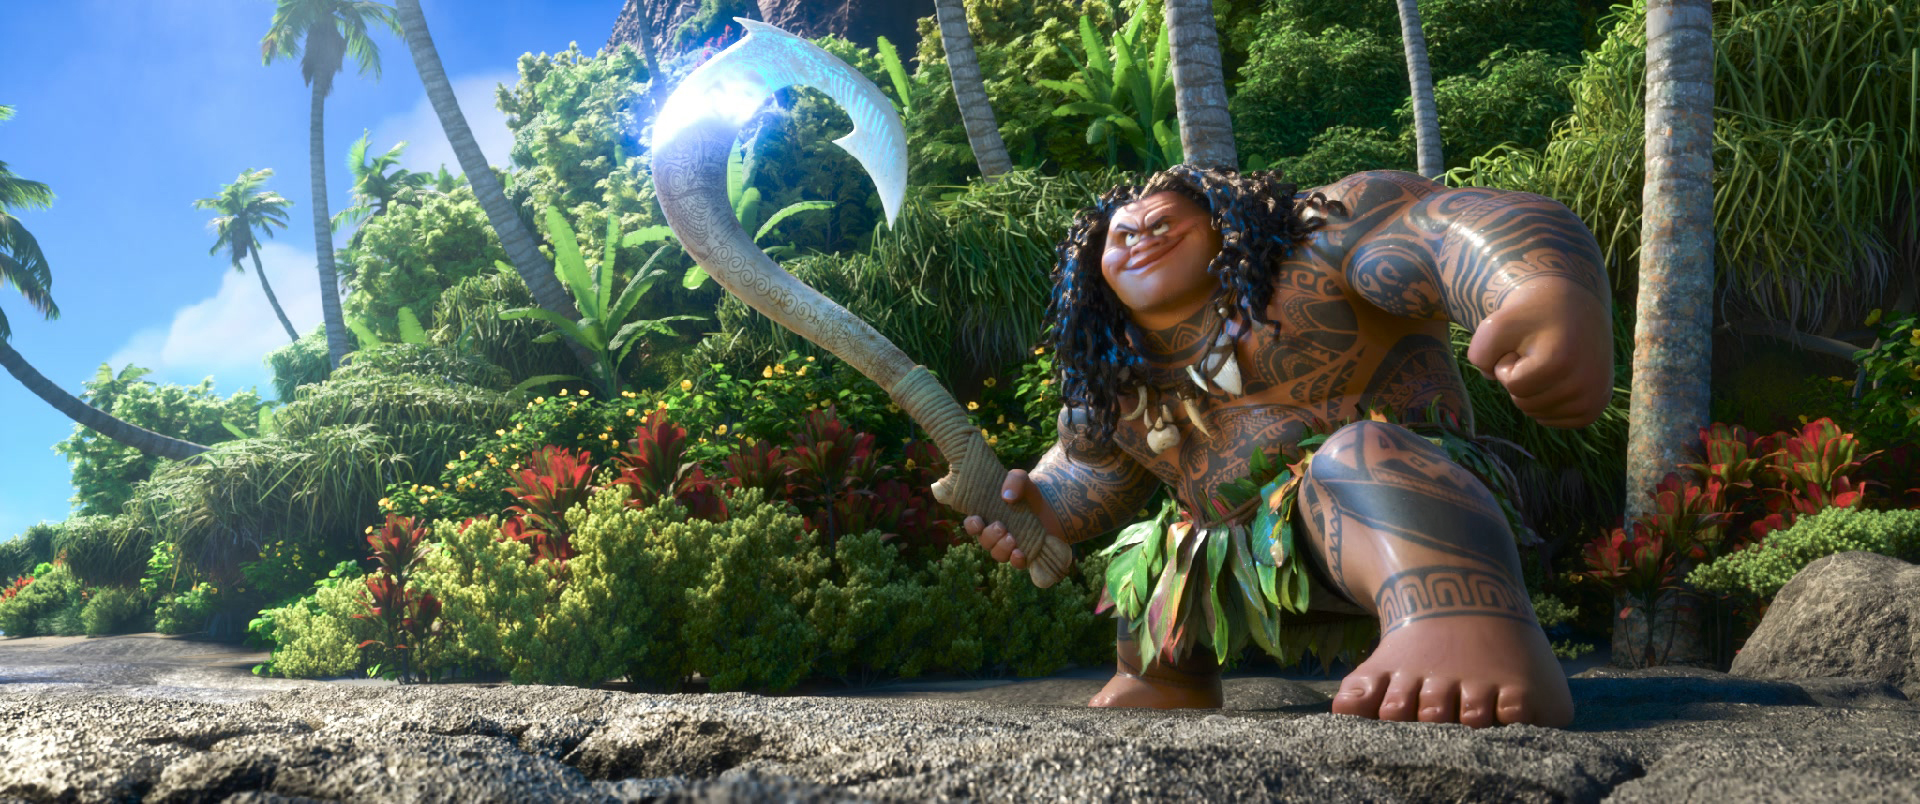 MAUI is a demigod—half god, half mortal, all awesome. Charismatic and funny, he wields a magical fishhook that allows him to shapeshift into all kinds of animals and pull up islands from the sea. Featuring the dreamboat Dwayne Johnson, who'd I'm sure many would let give them a 'rock bottom' on <a href=